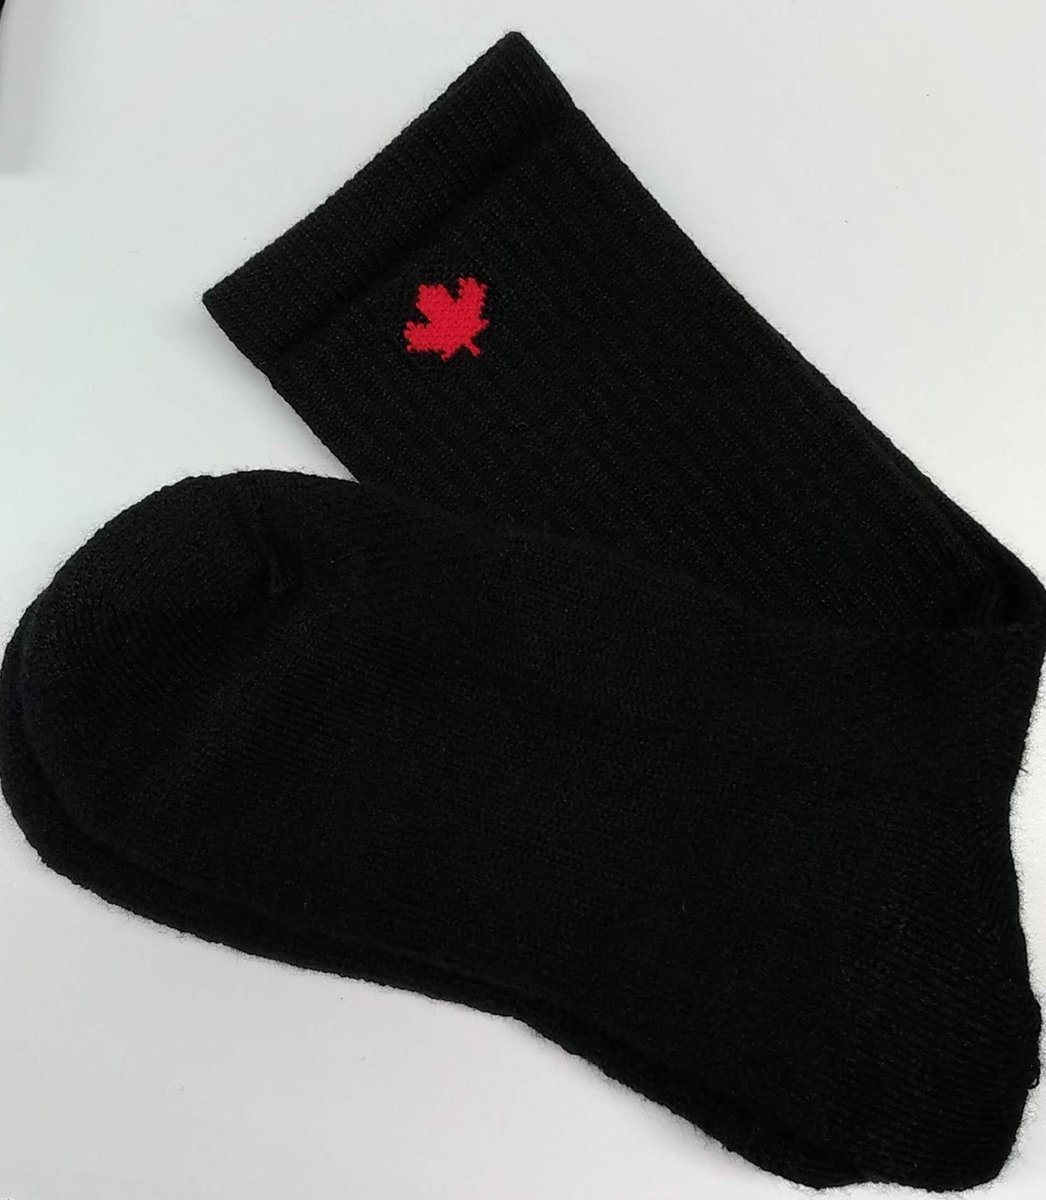 Our Merino Wool Socks are back! With more people enjoying the outdoors, we decided to bring back this cozy, warm favourite. See our website for details. #merinowool #merinowoolsocks #madeincanada #madeinontario #madeincanadasocks #warmsocks #campinglife #madeinontariosocks